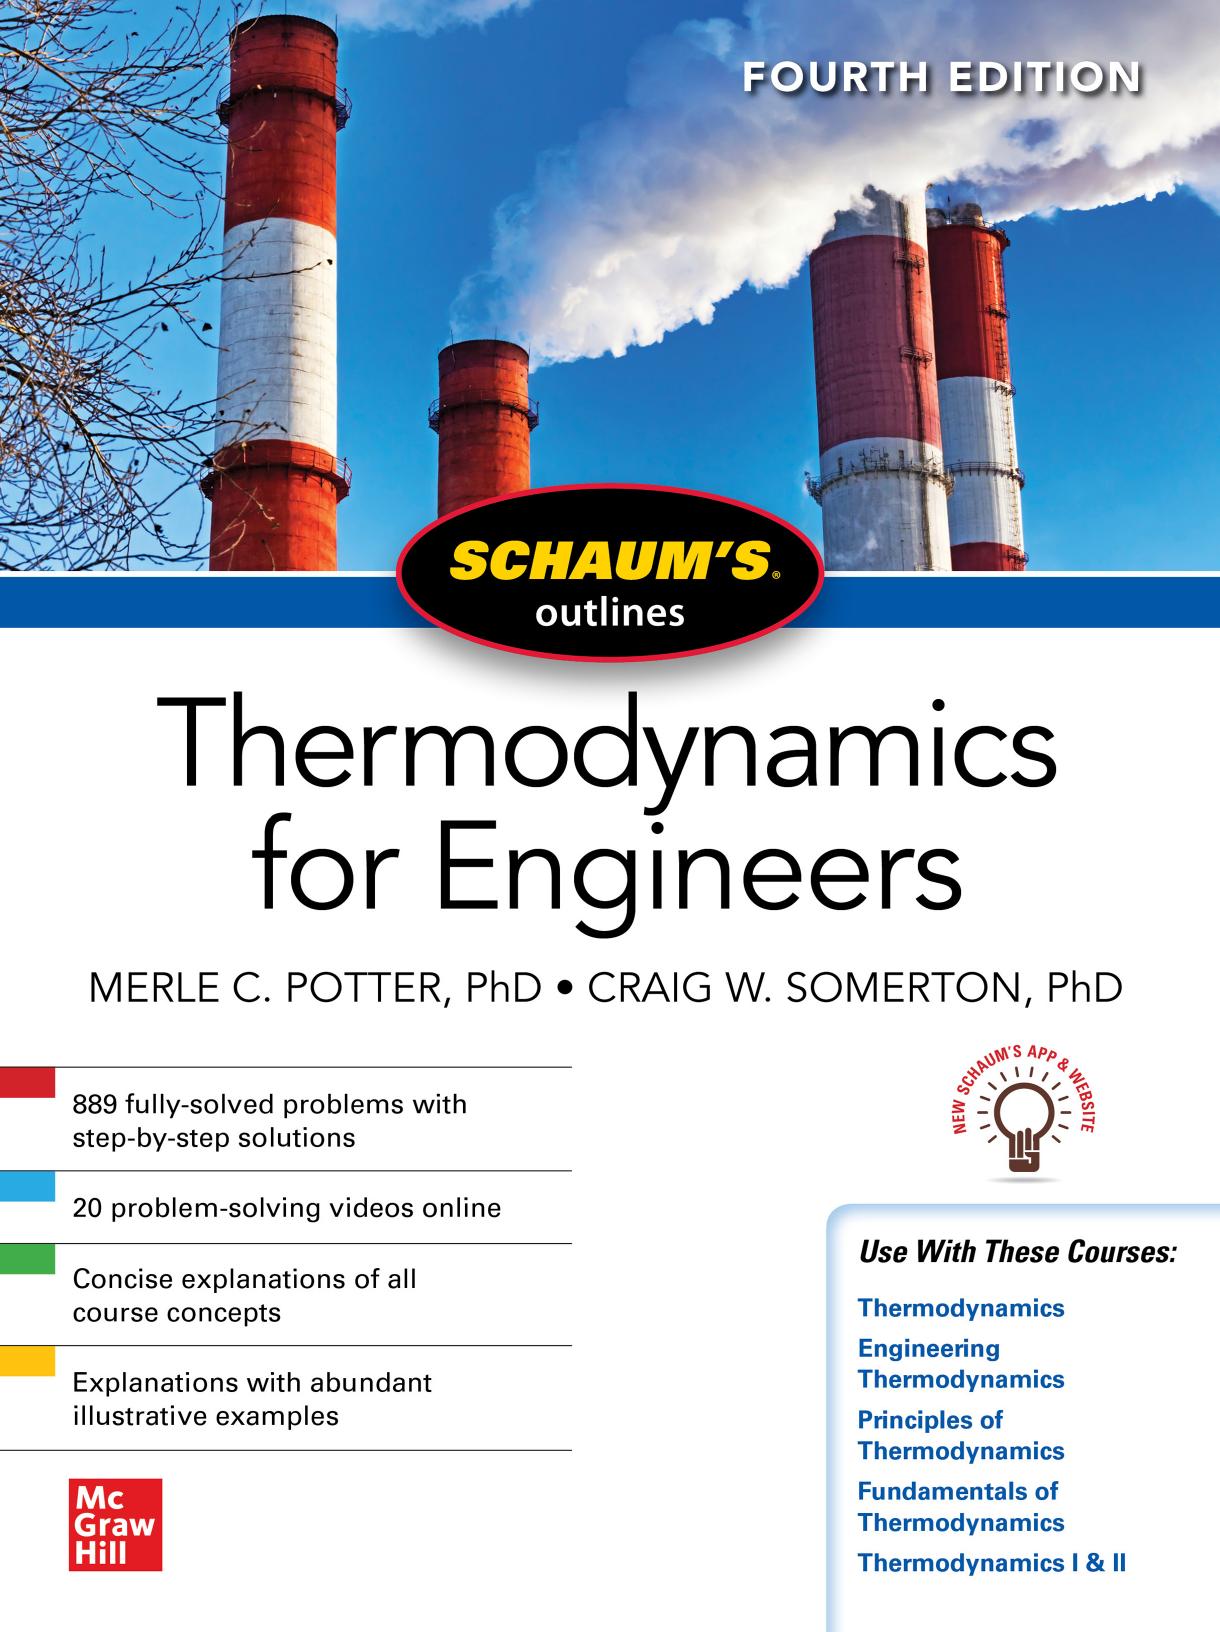 Download Schaums Outline of Thermodynamics for Engineers, 4th Edition SoftArchive